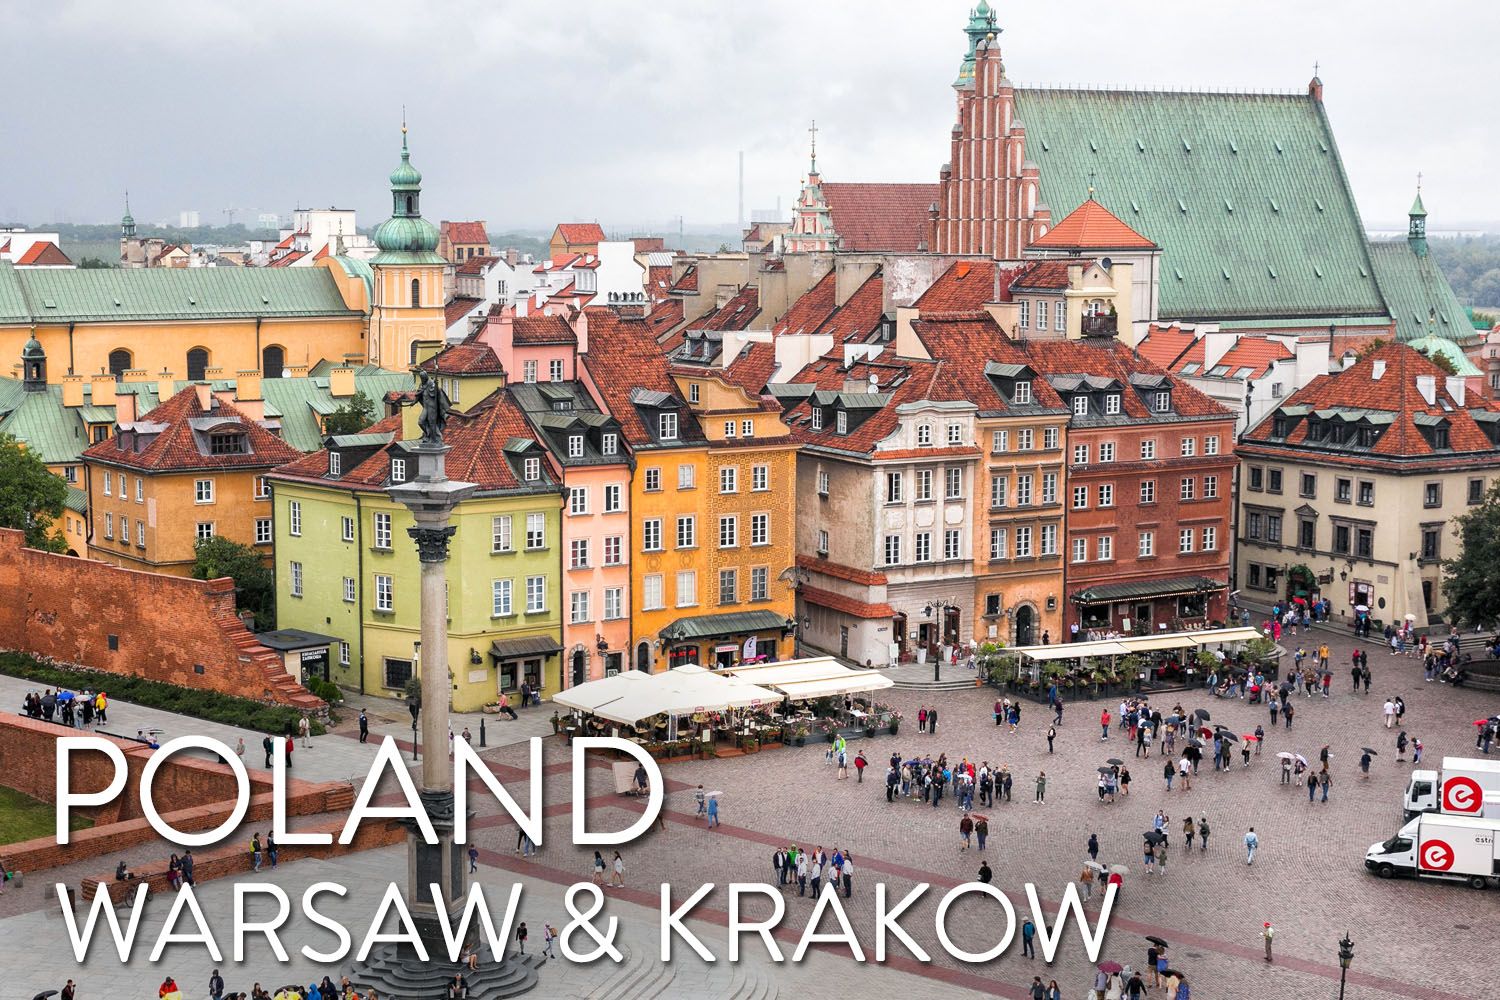 Warsaw and Krakow